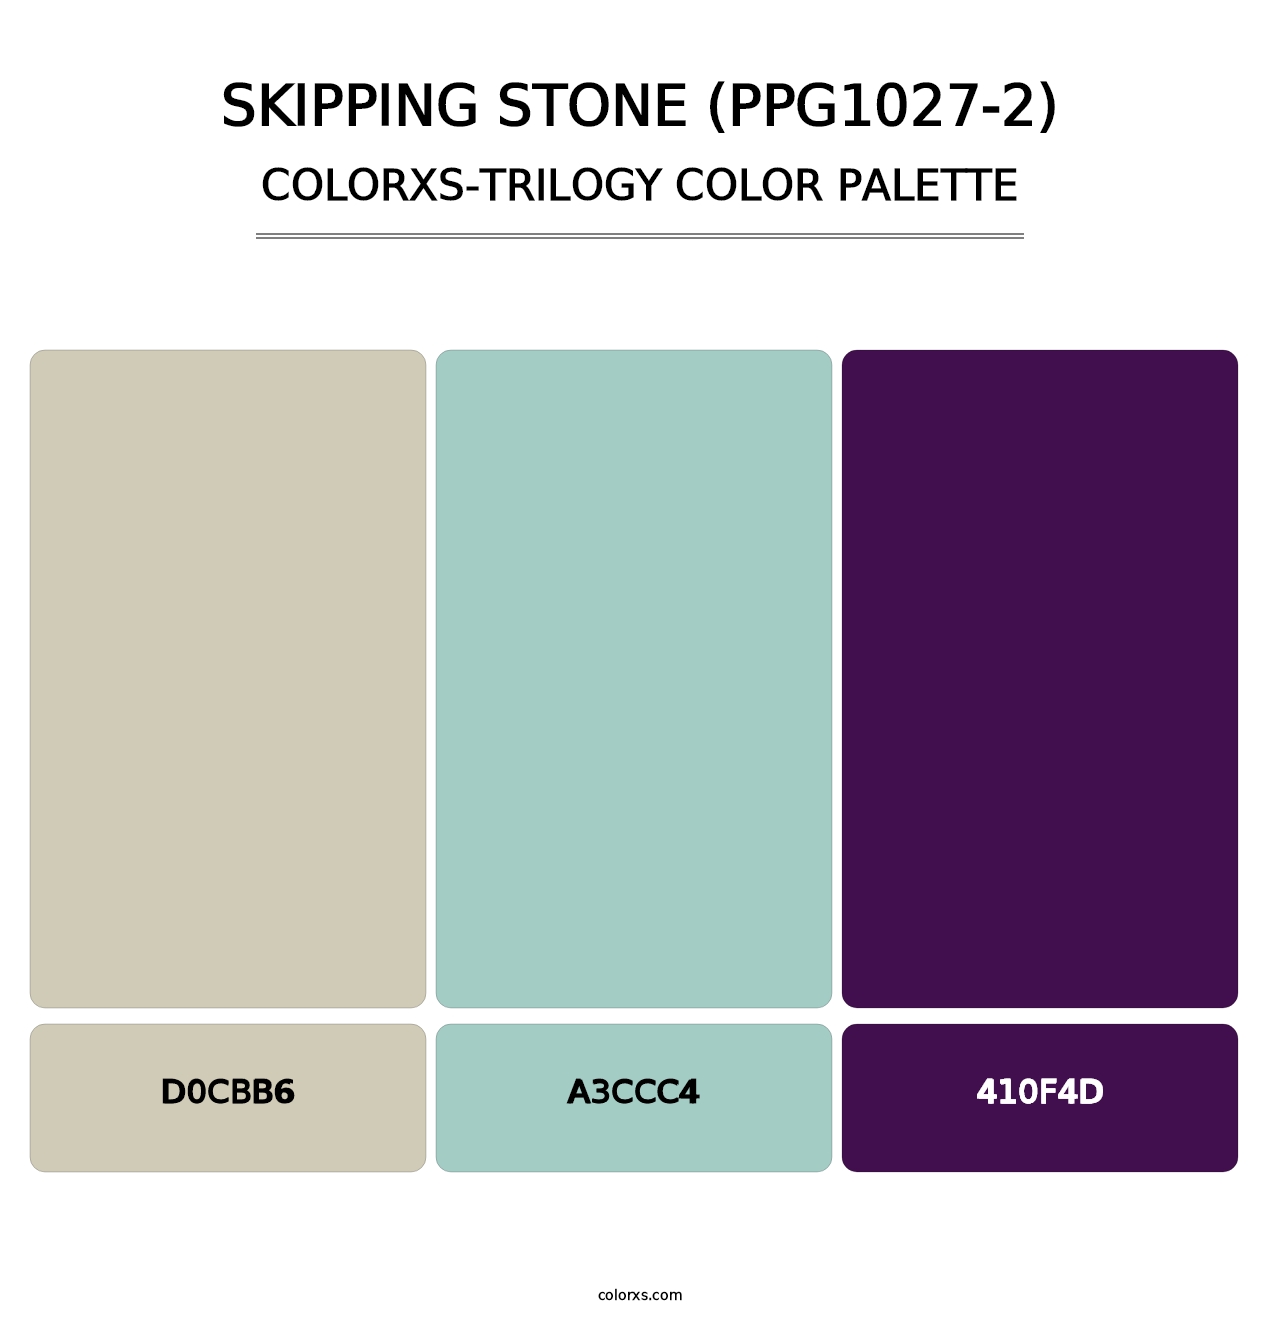 Skipping Stone (PPG1027-2) - Colorxs Trilogy Palette